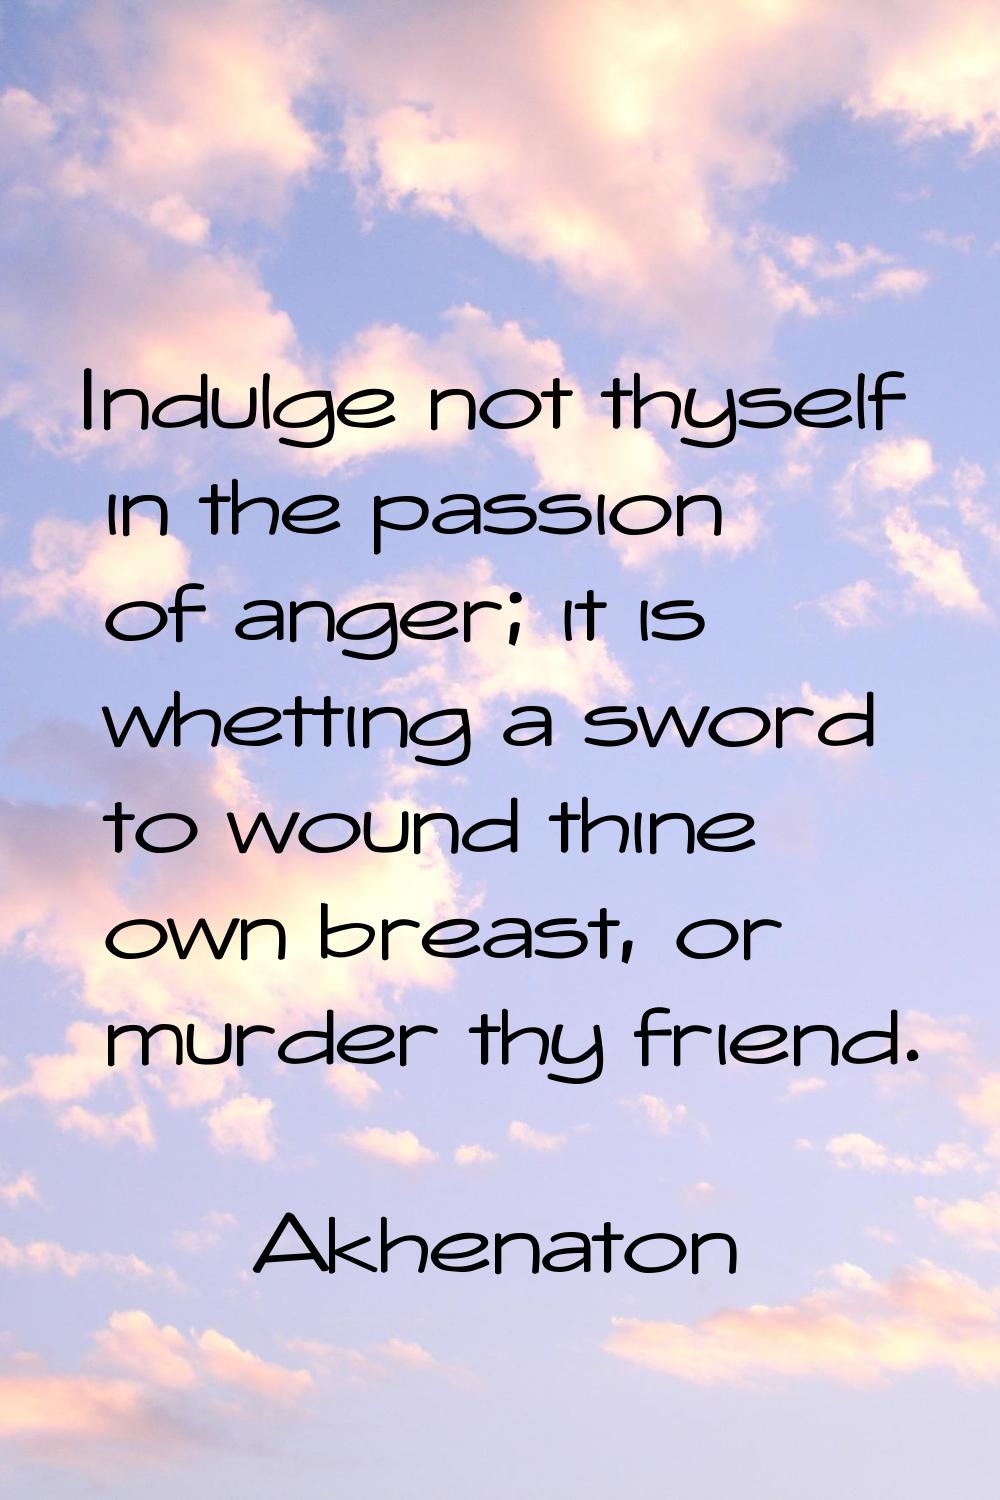 Indulge not thyself in the passion of anger; it is whetting a sword to wound thine own breast, or m